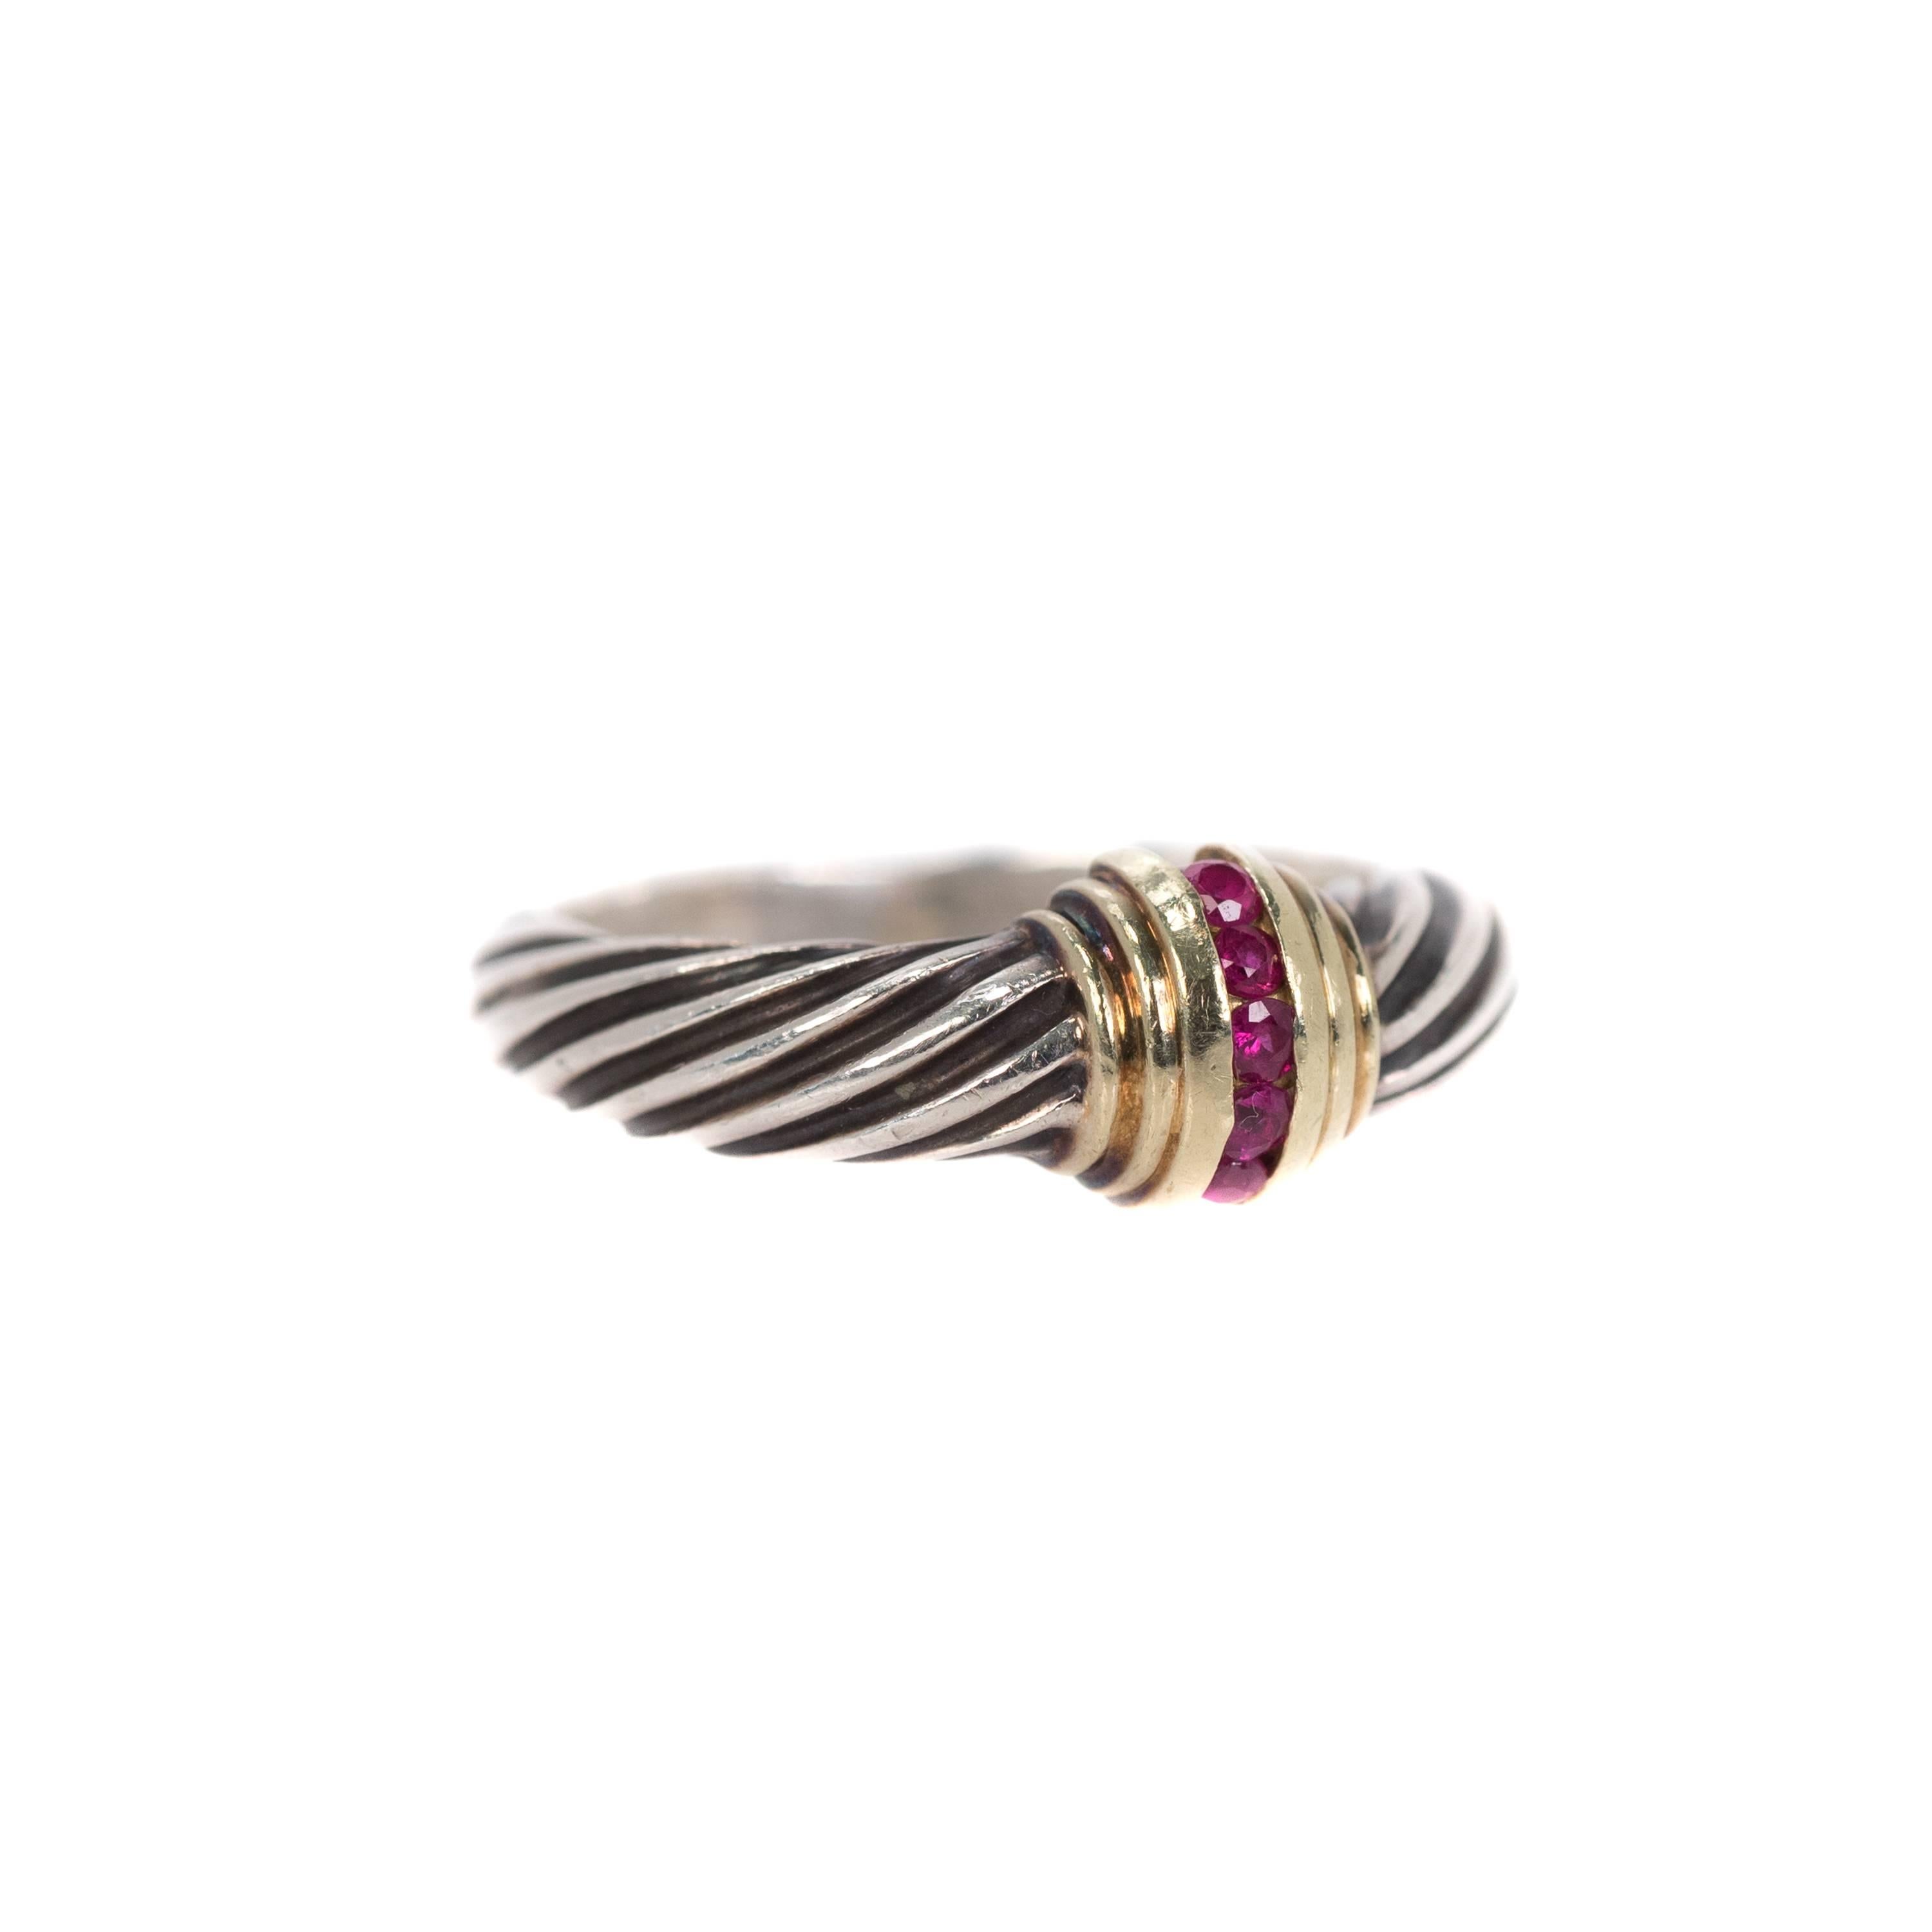 Rare, Retired Design - David Yurman Cable Ring with Rubies -  Sterling Silver, 14k Yellow Gold, Rubies

Features David Yurman's signature single Cable design crafted in shining Sterling Silver. 
The ring front is accented with a vertical row of 5